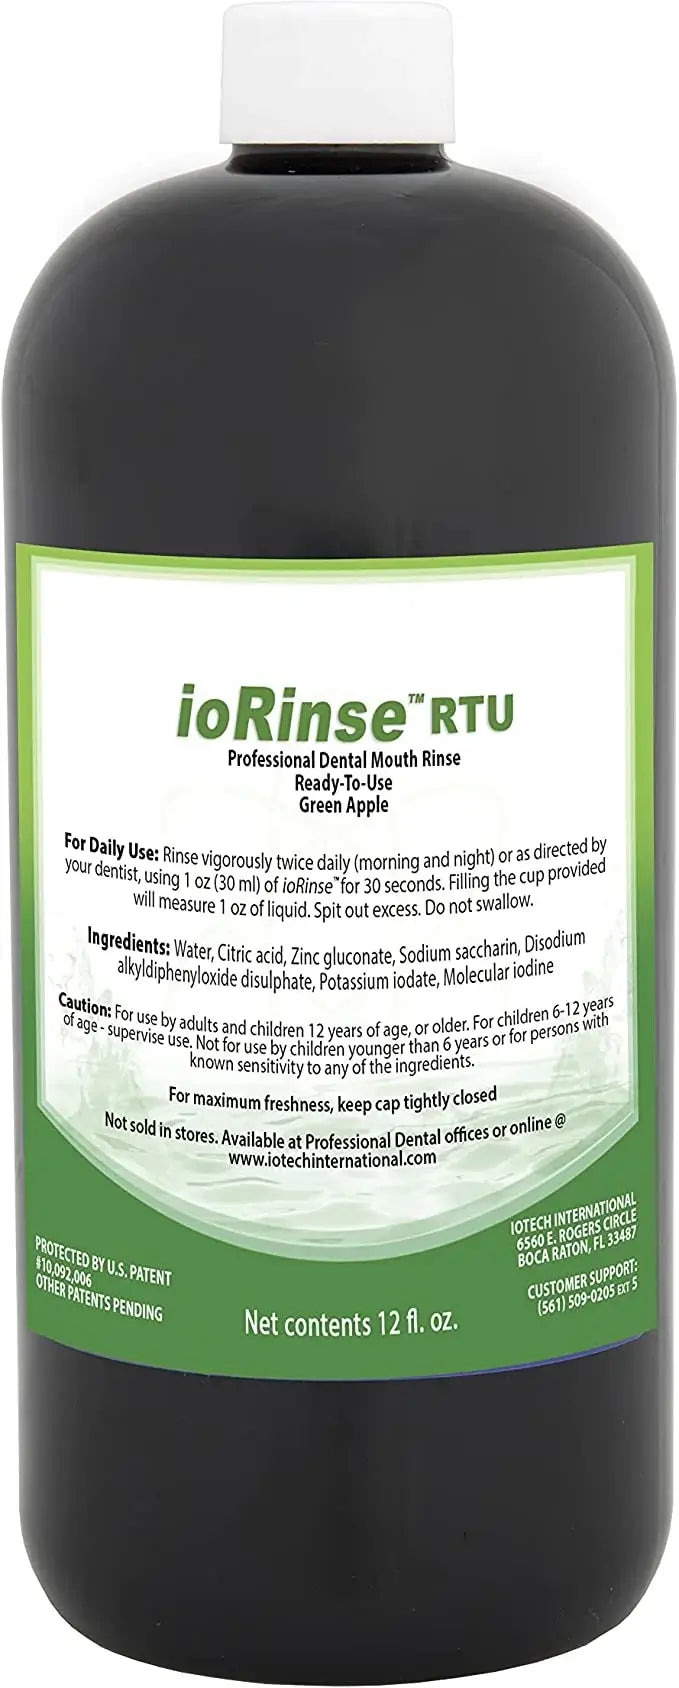 Iotech ioRinse Mouthwash - Get A Natural Clean - Alcohol Free, Fluoride Free - Superior Dental Cleaner for Teeth, Gums and Bad Breath - Green Apple (1 Liter Bottle)…